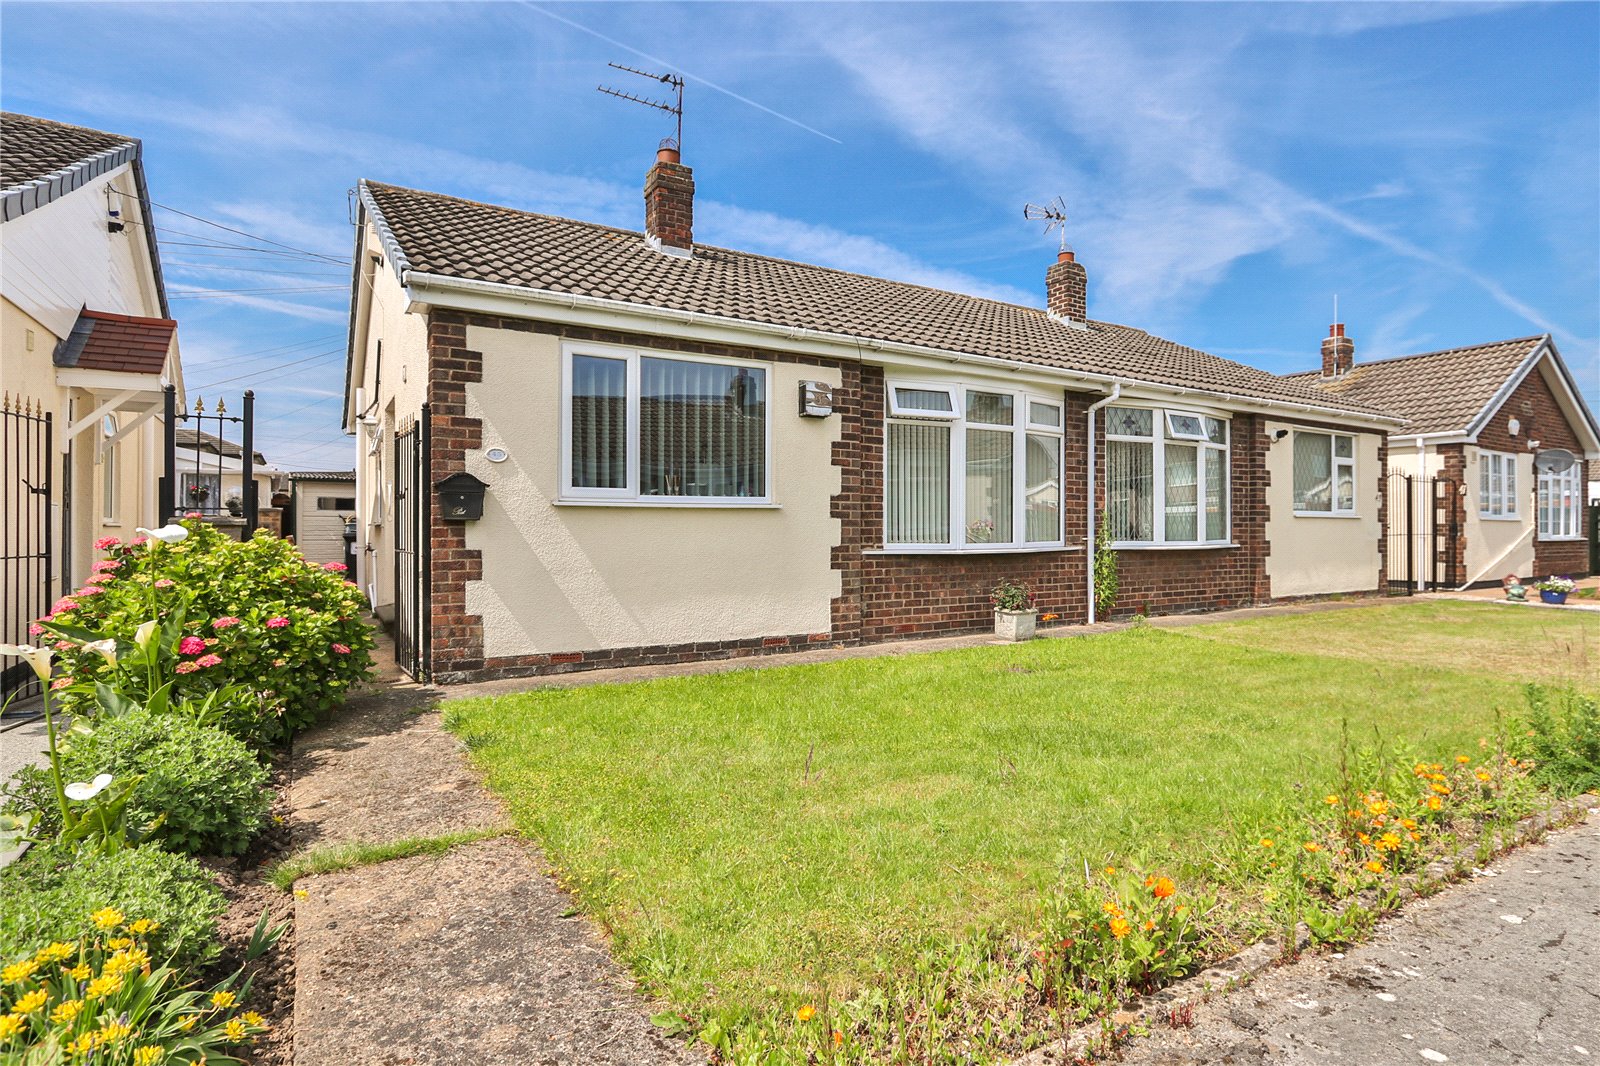 2 bed bungalow for sale in Clarondale, Hull, HU7 